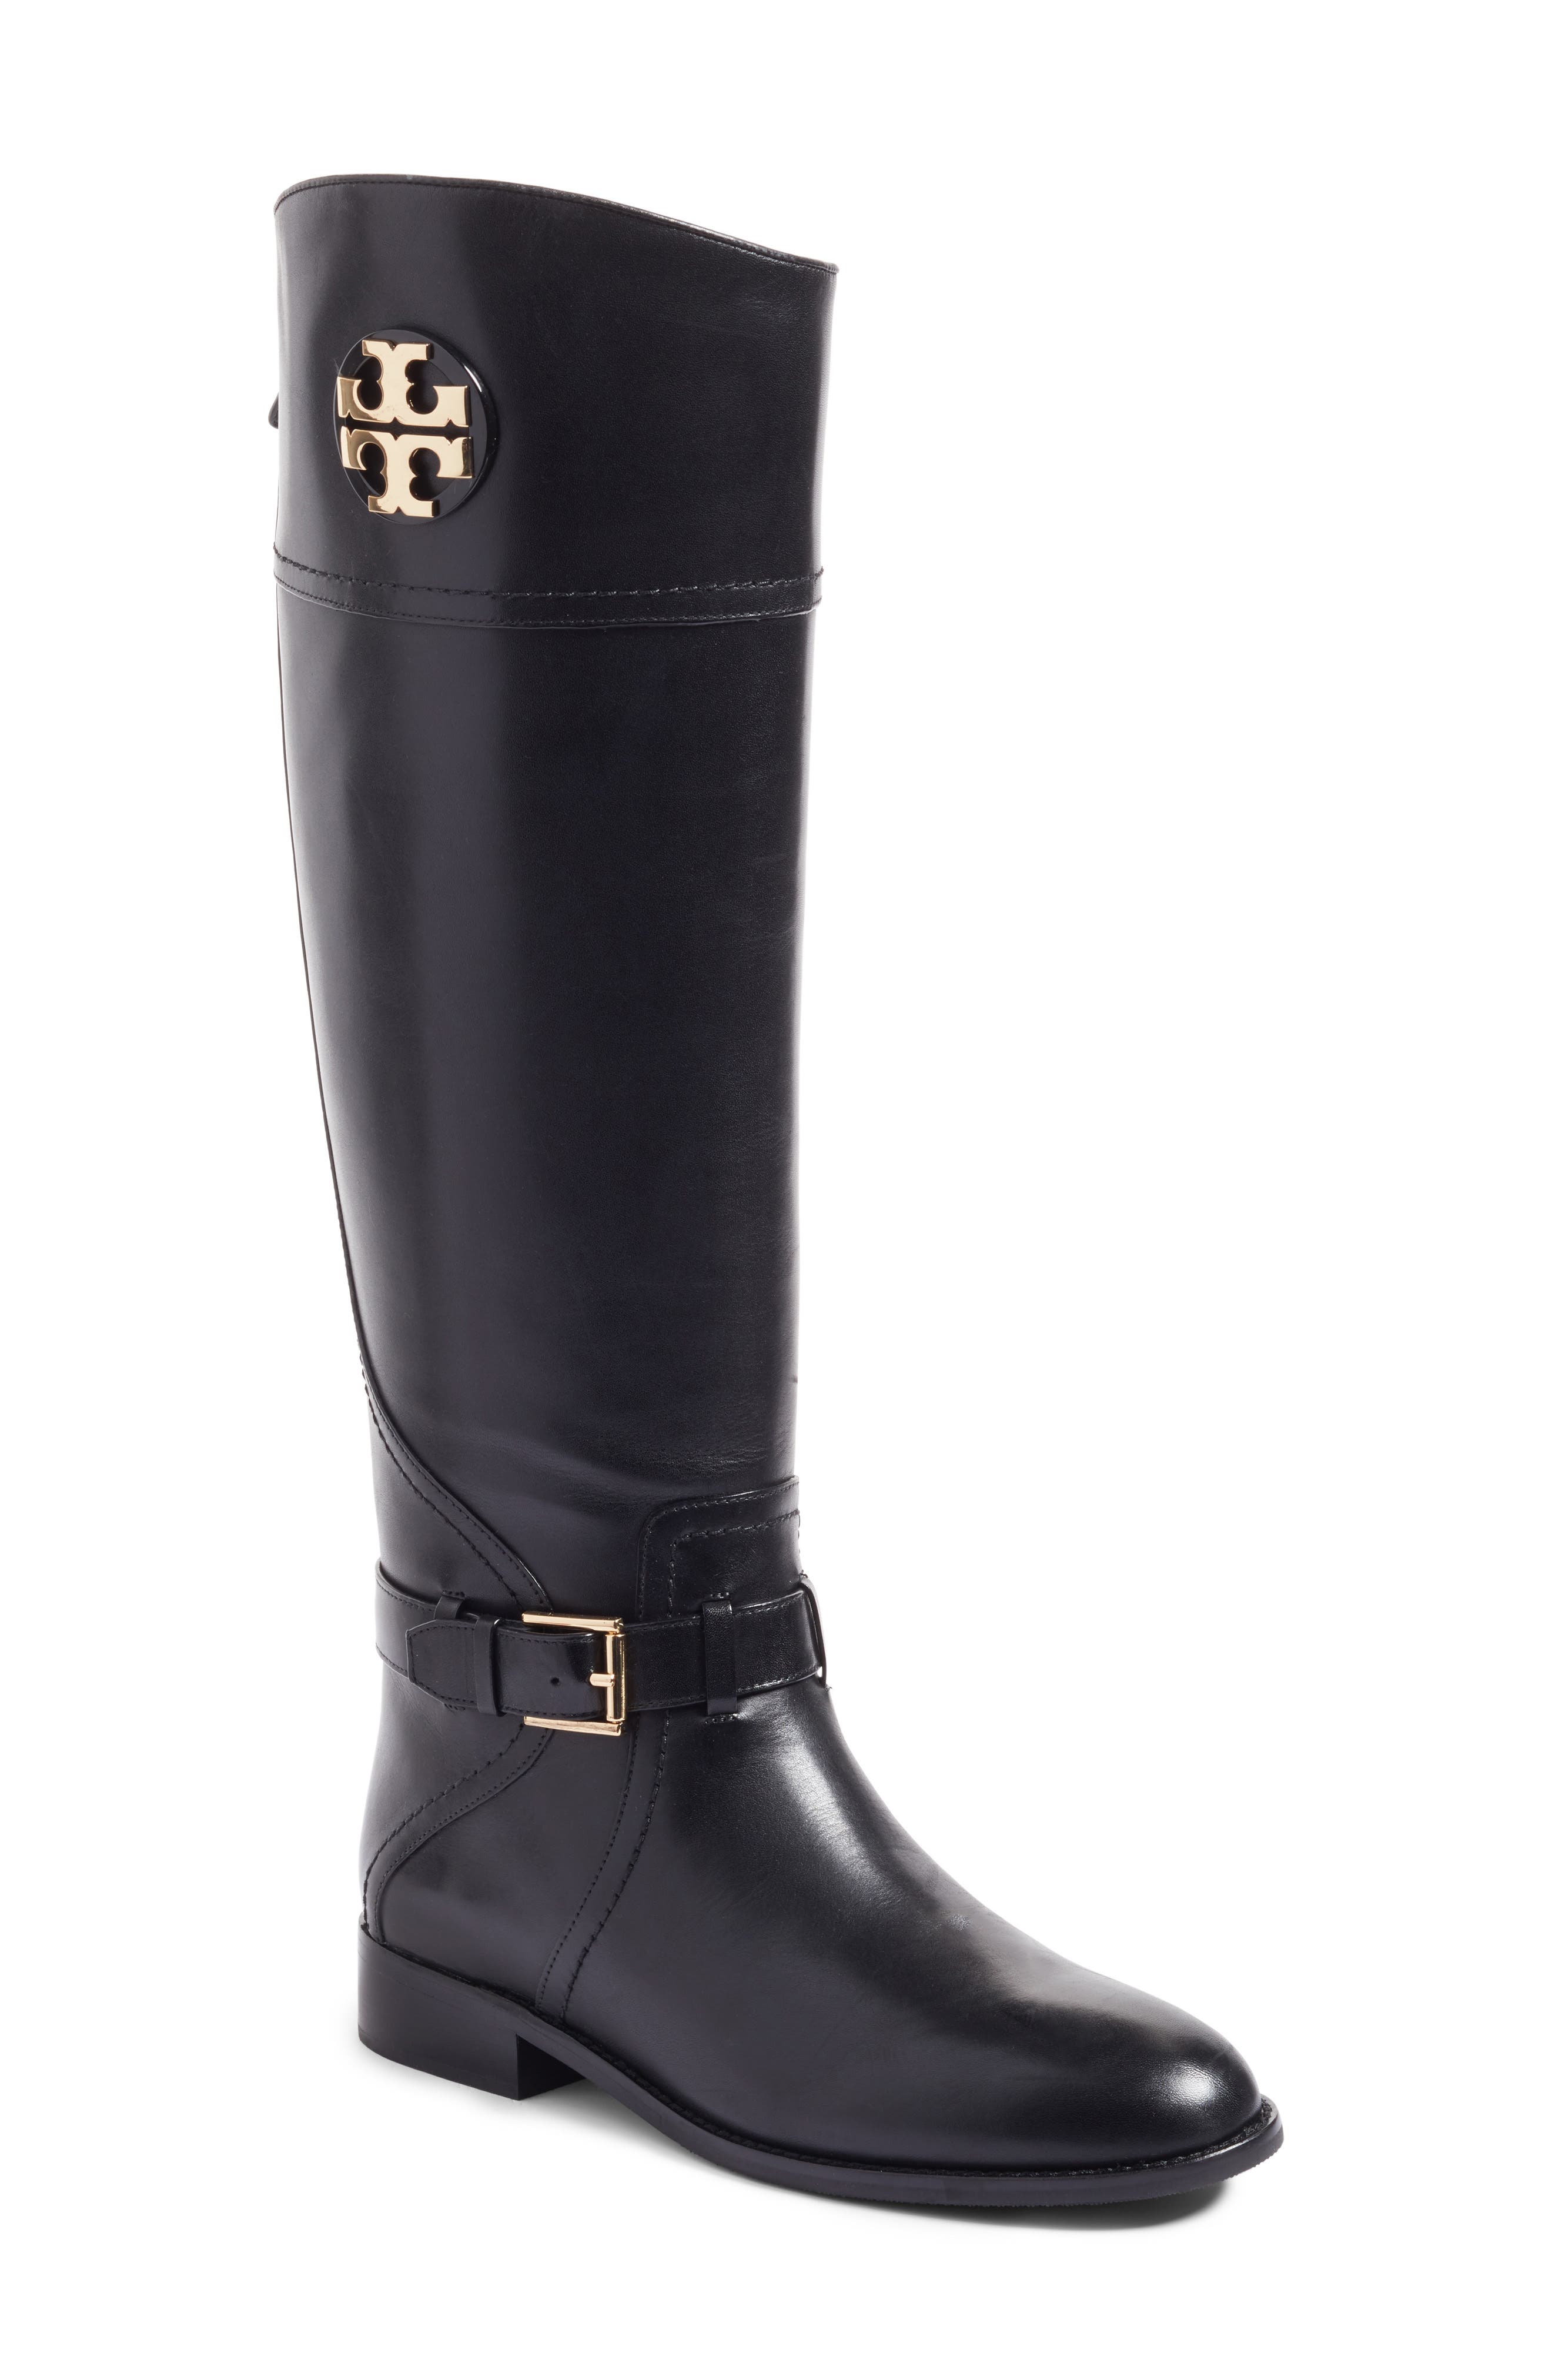 Tory Burch | Adeline Leather Riding Boot | Nordstrom Rack